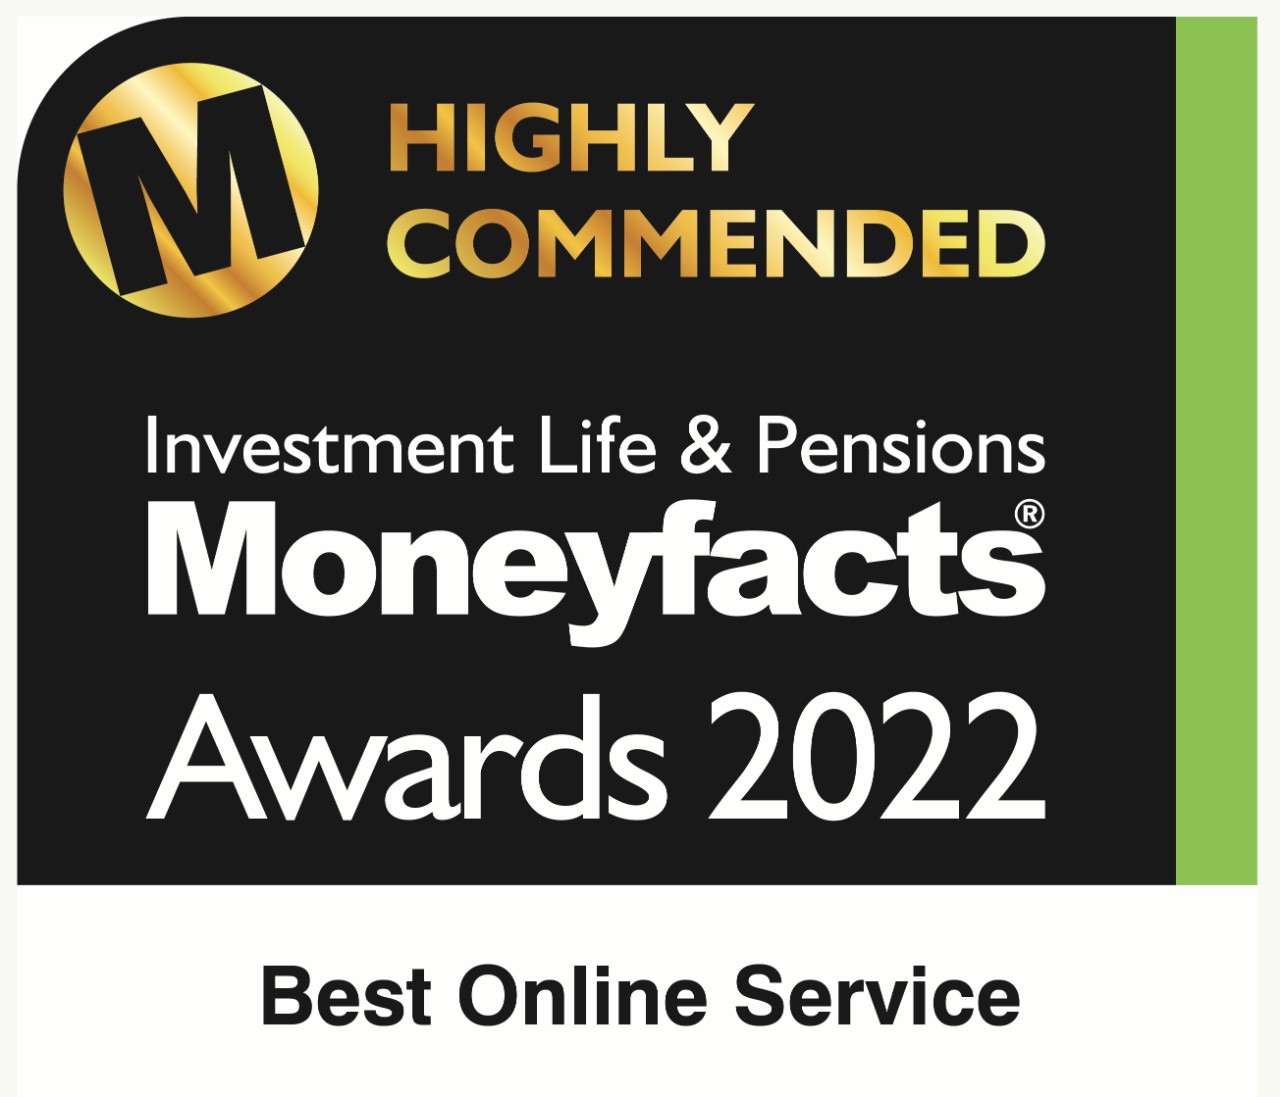 Highly recommended Best Online Service at the Investment Life & Pensions Monetfacts Awards 2022